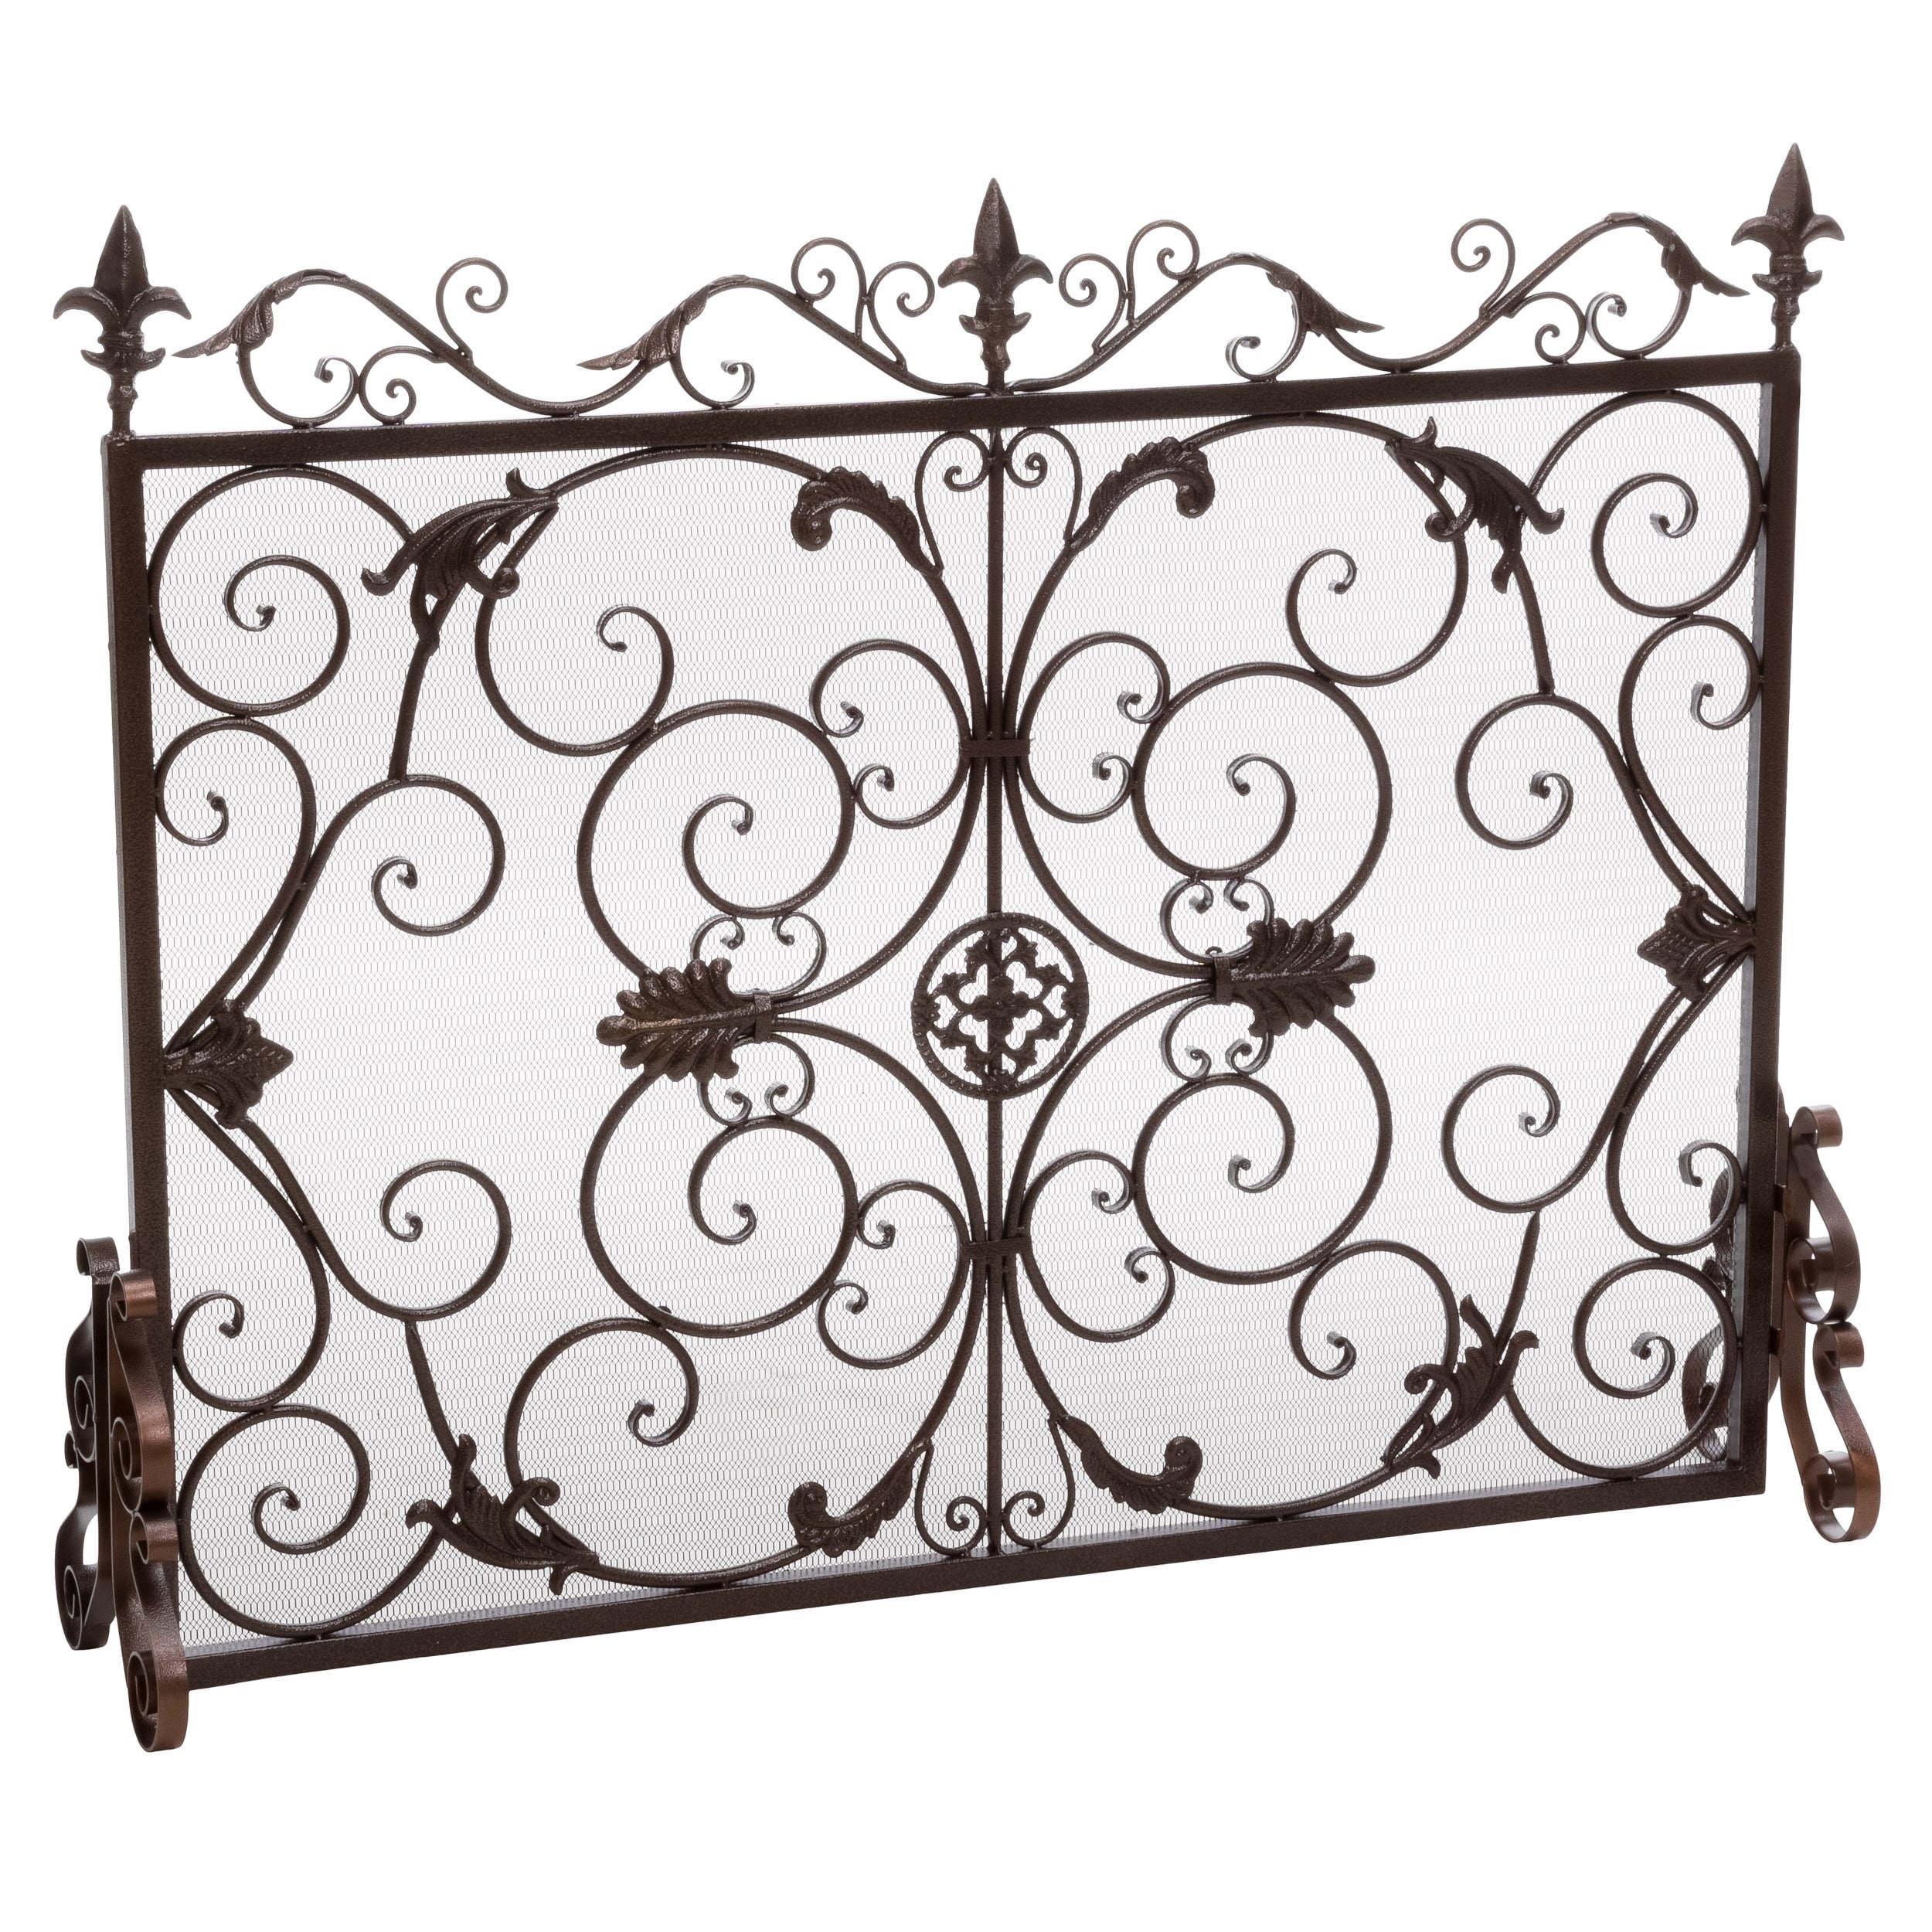 Christopher Knight Home Wilmington Fireplace Screen On Sale Bed Bath   Beyond 9570288